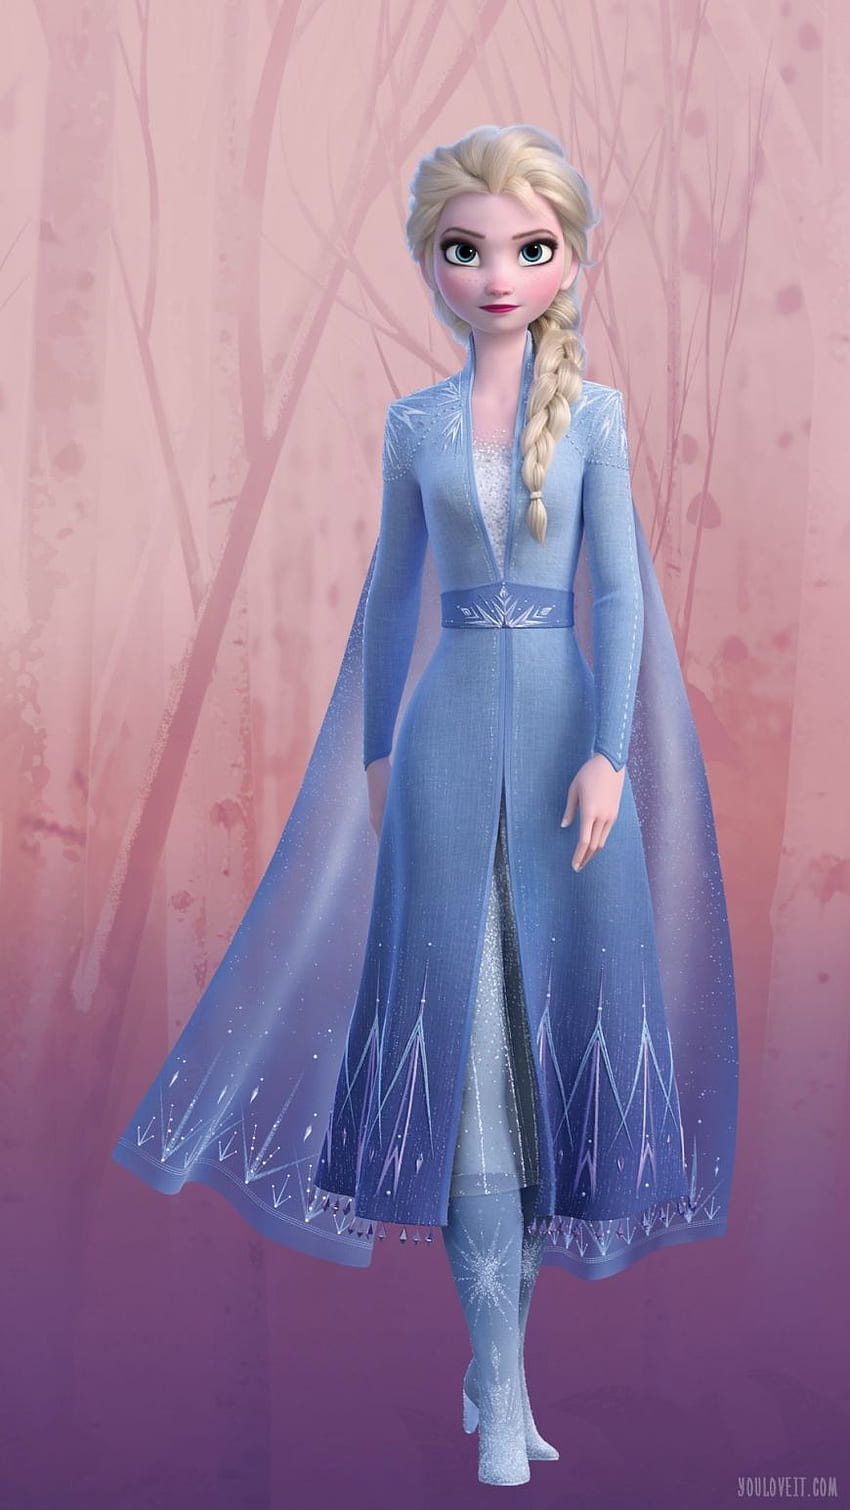 An Incredible Compilation of Over 999 Frozen 2 Elsa Images in Stunning 4K